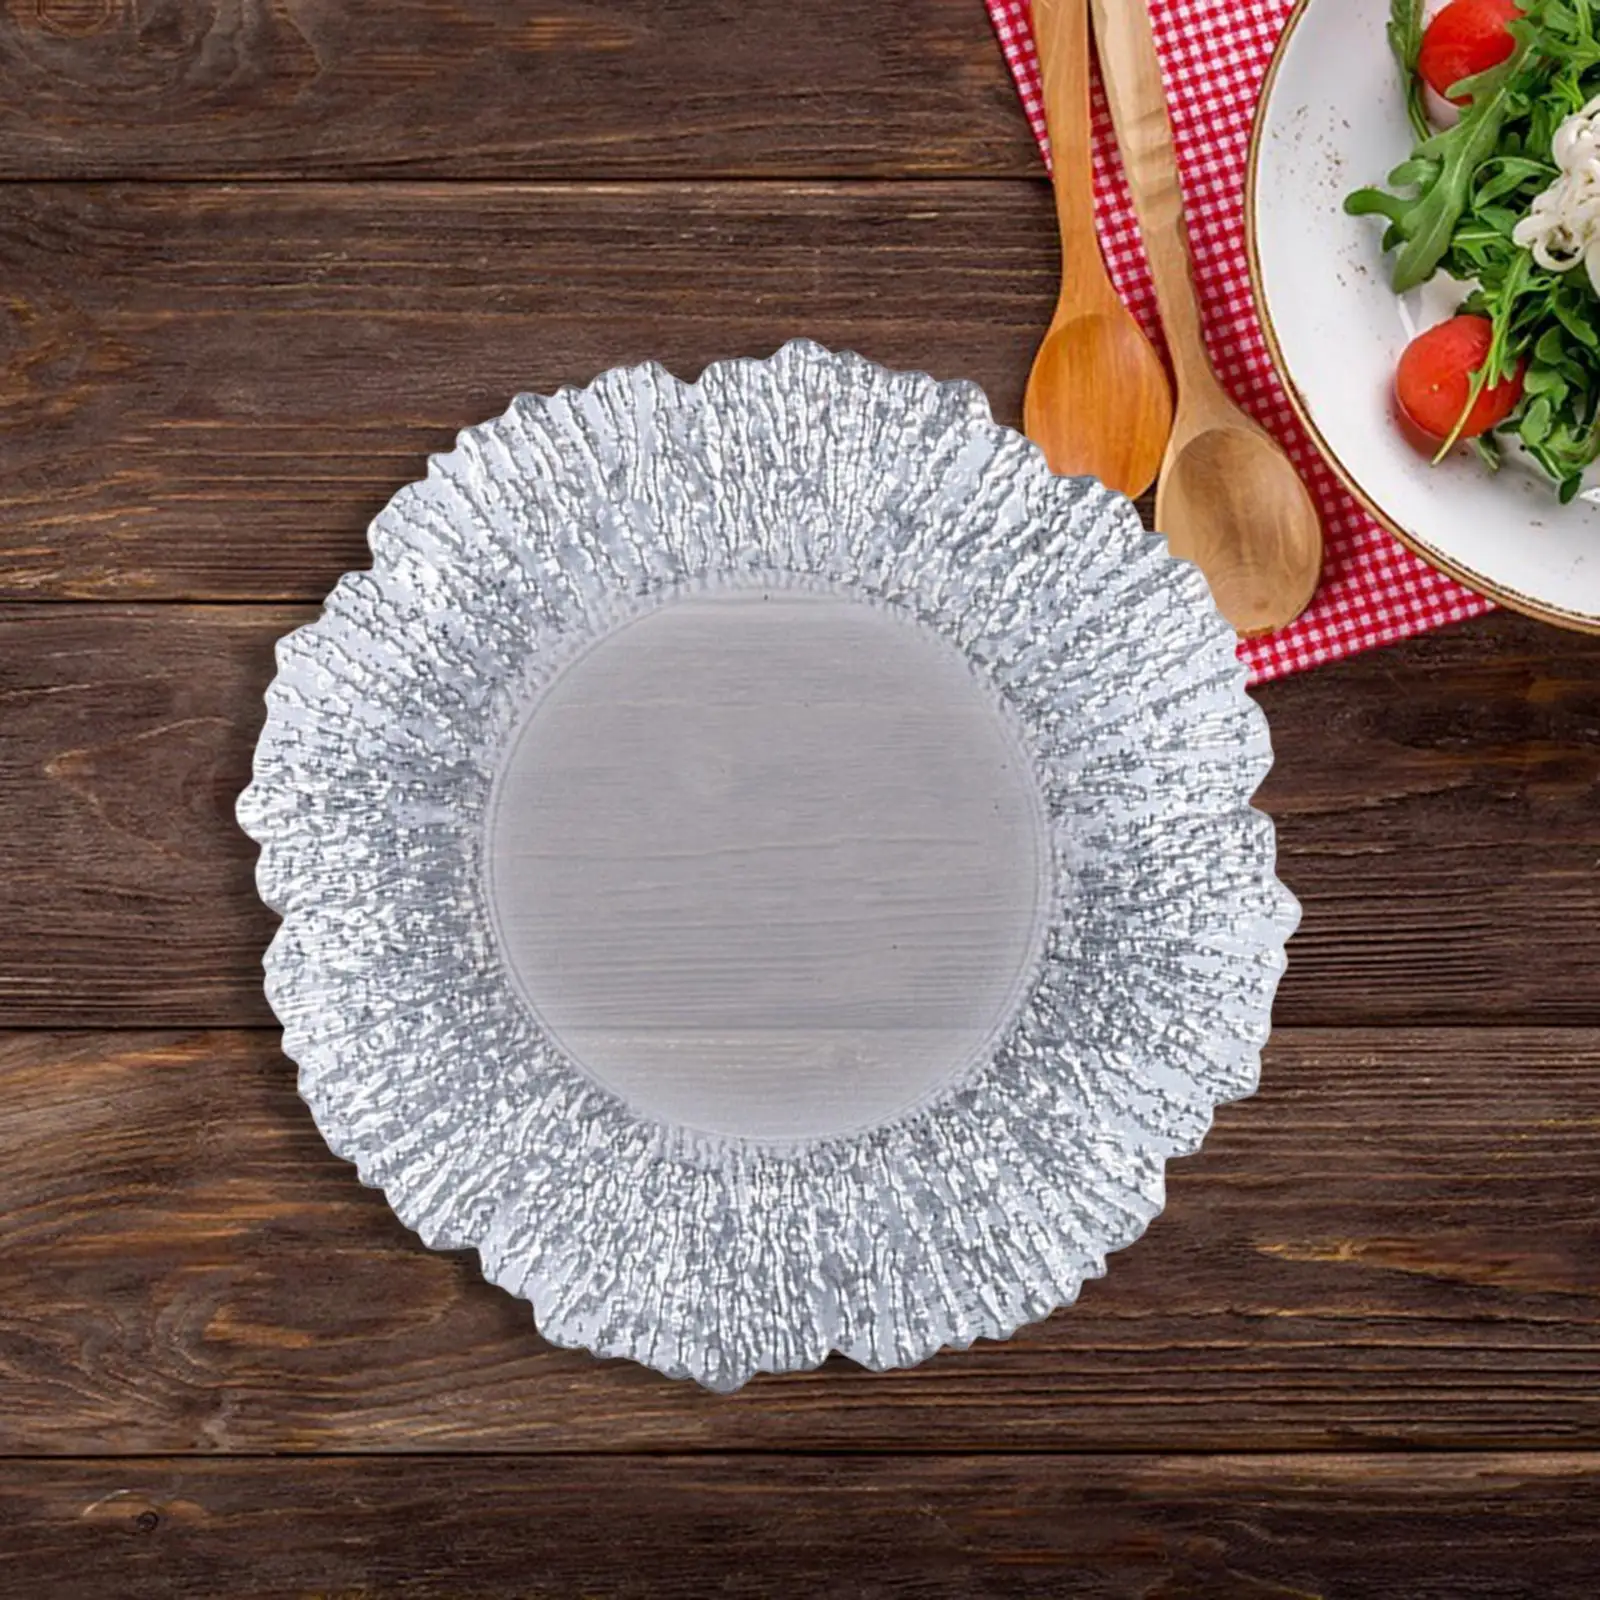 Reusable Service Platter Serving Tray Holiday Decorations Reception Durable Glass Round Dish for Steak Dessert Pies Farmhouse